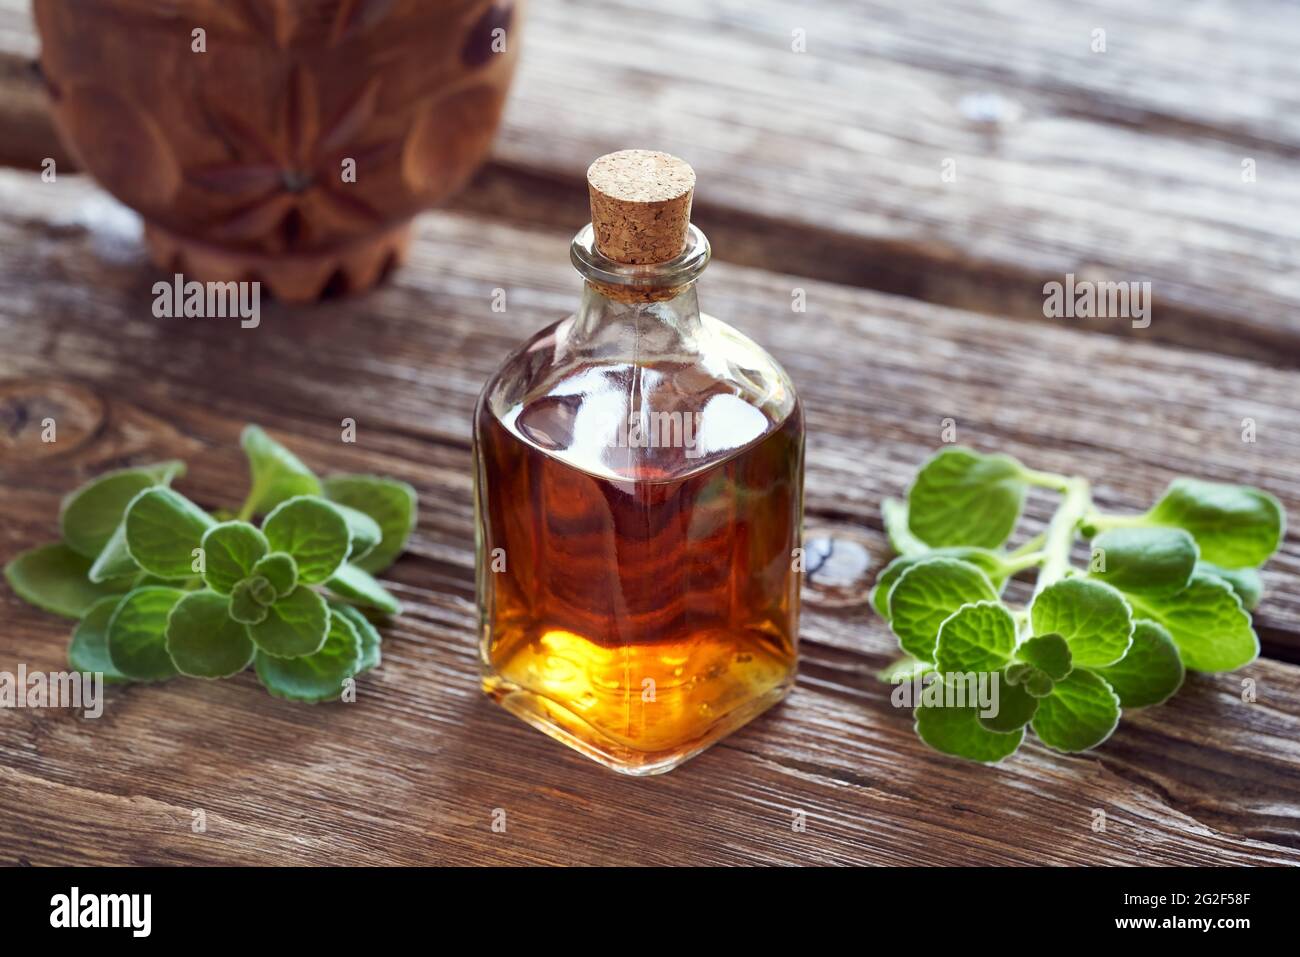 A bottle of silver spurflower tincture with fresh Plectranthus argentatus plant. Herbal or alternative medicine. Stock Photo